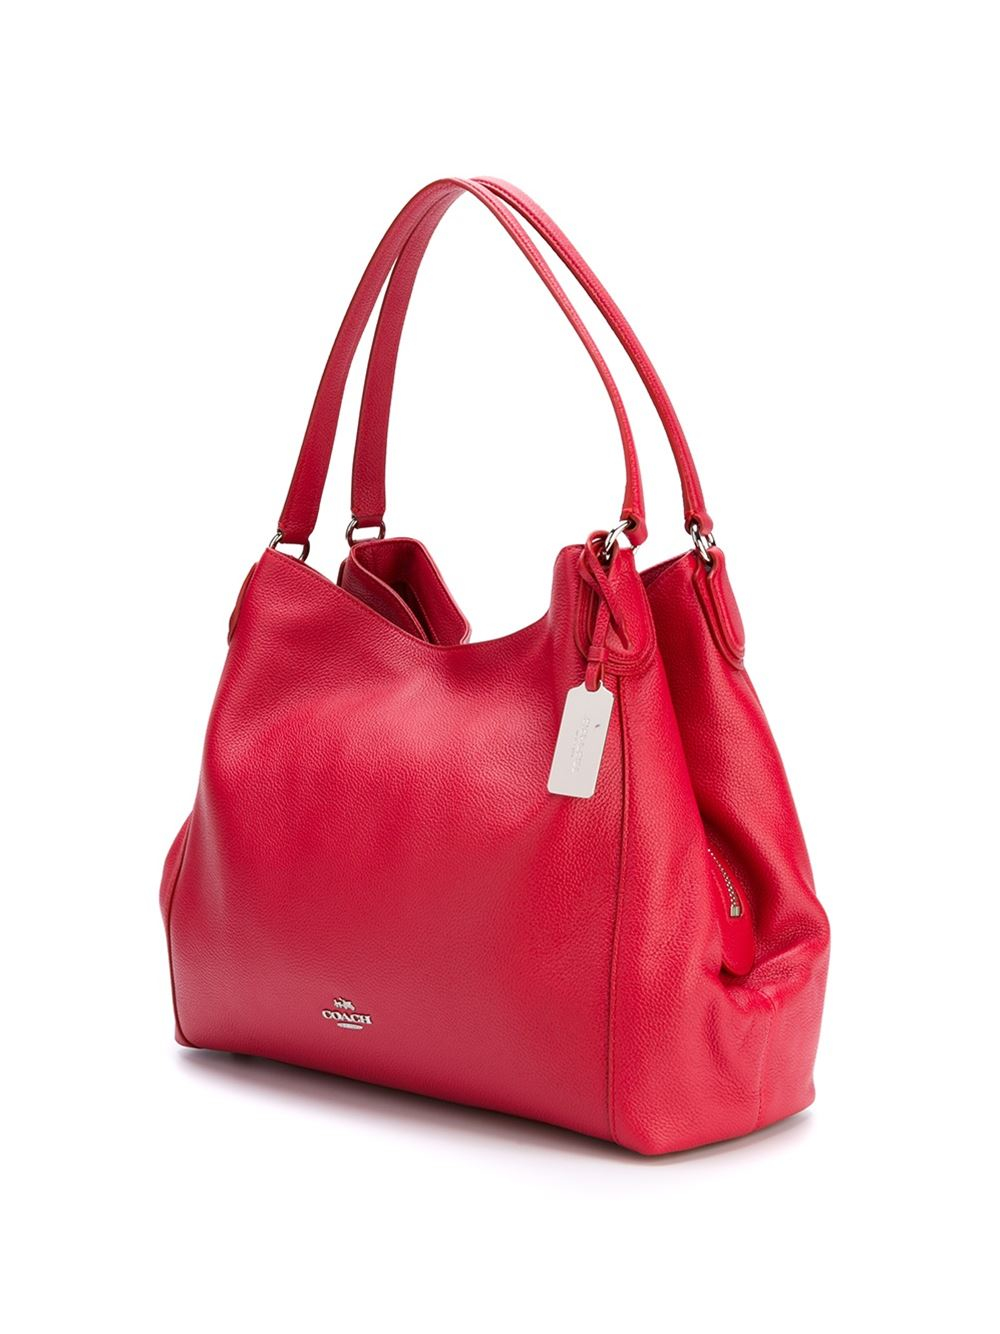 COACH Leather Classic Shoulder Bag in Red - Lyst